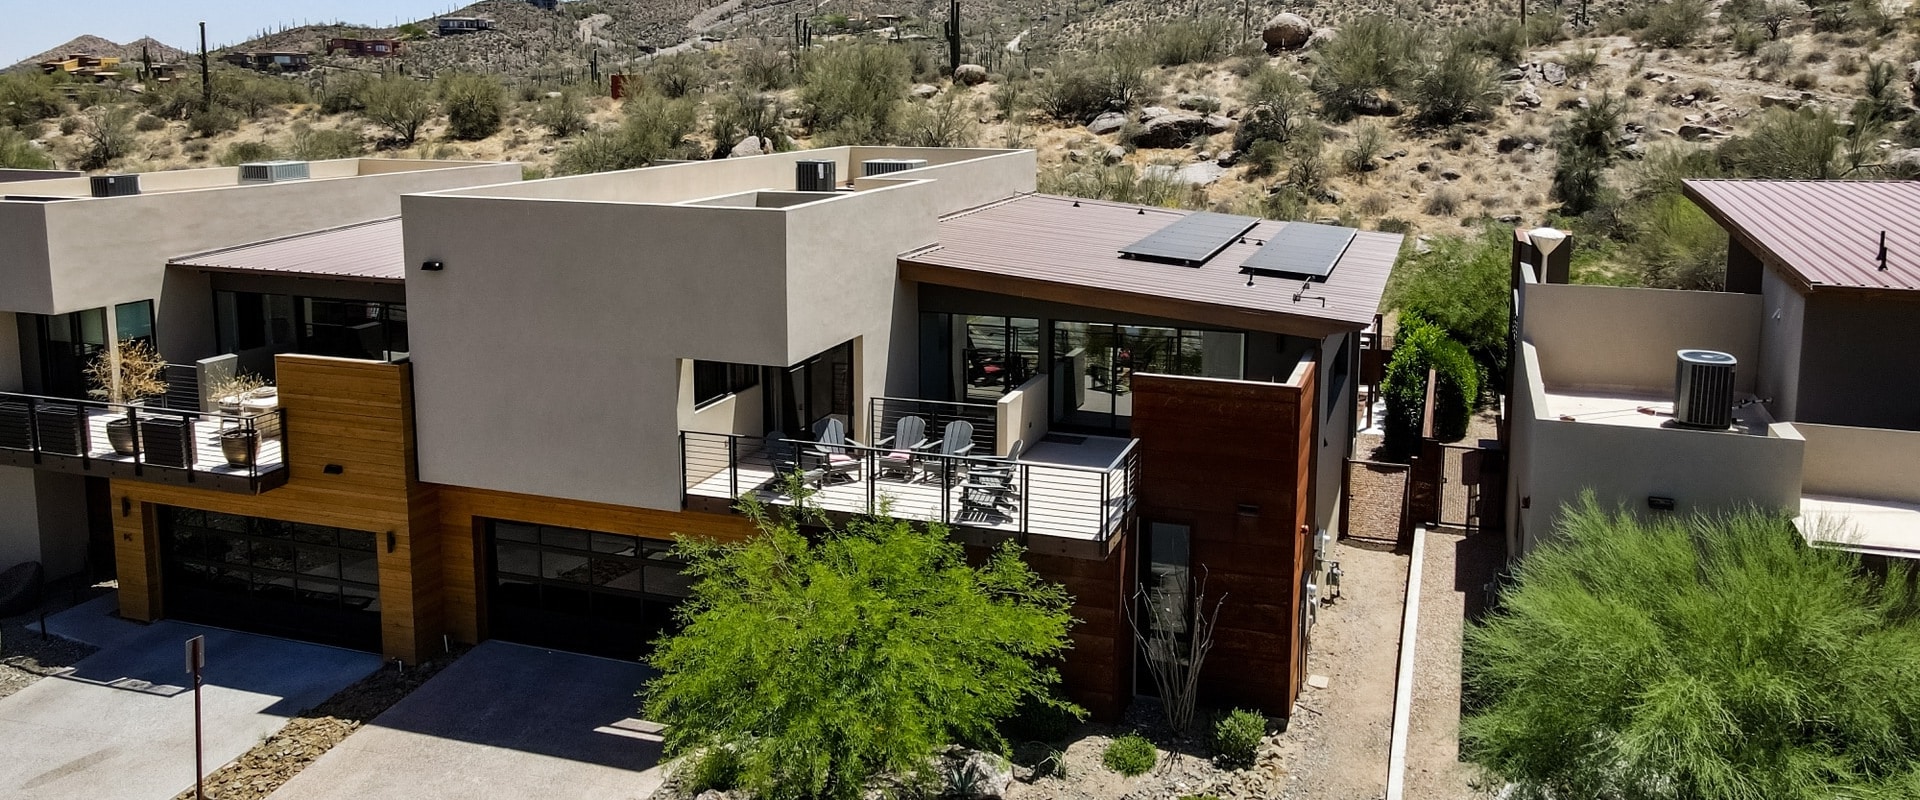 Energy-Efficient Design and Systems: Creating a Sustainable and Eco-Friendly Home